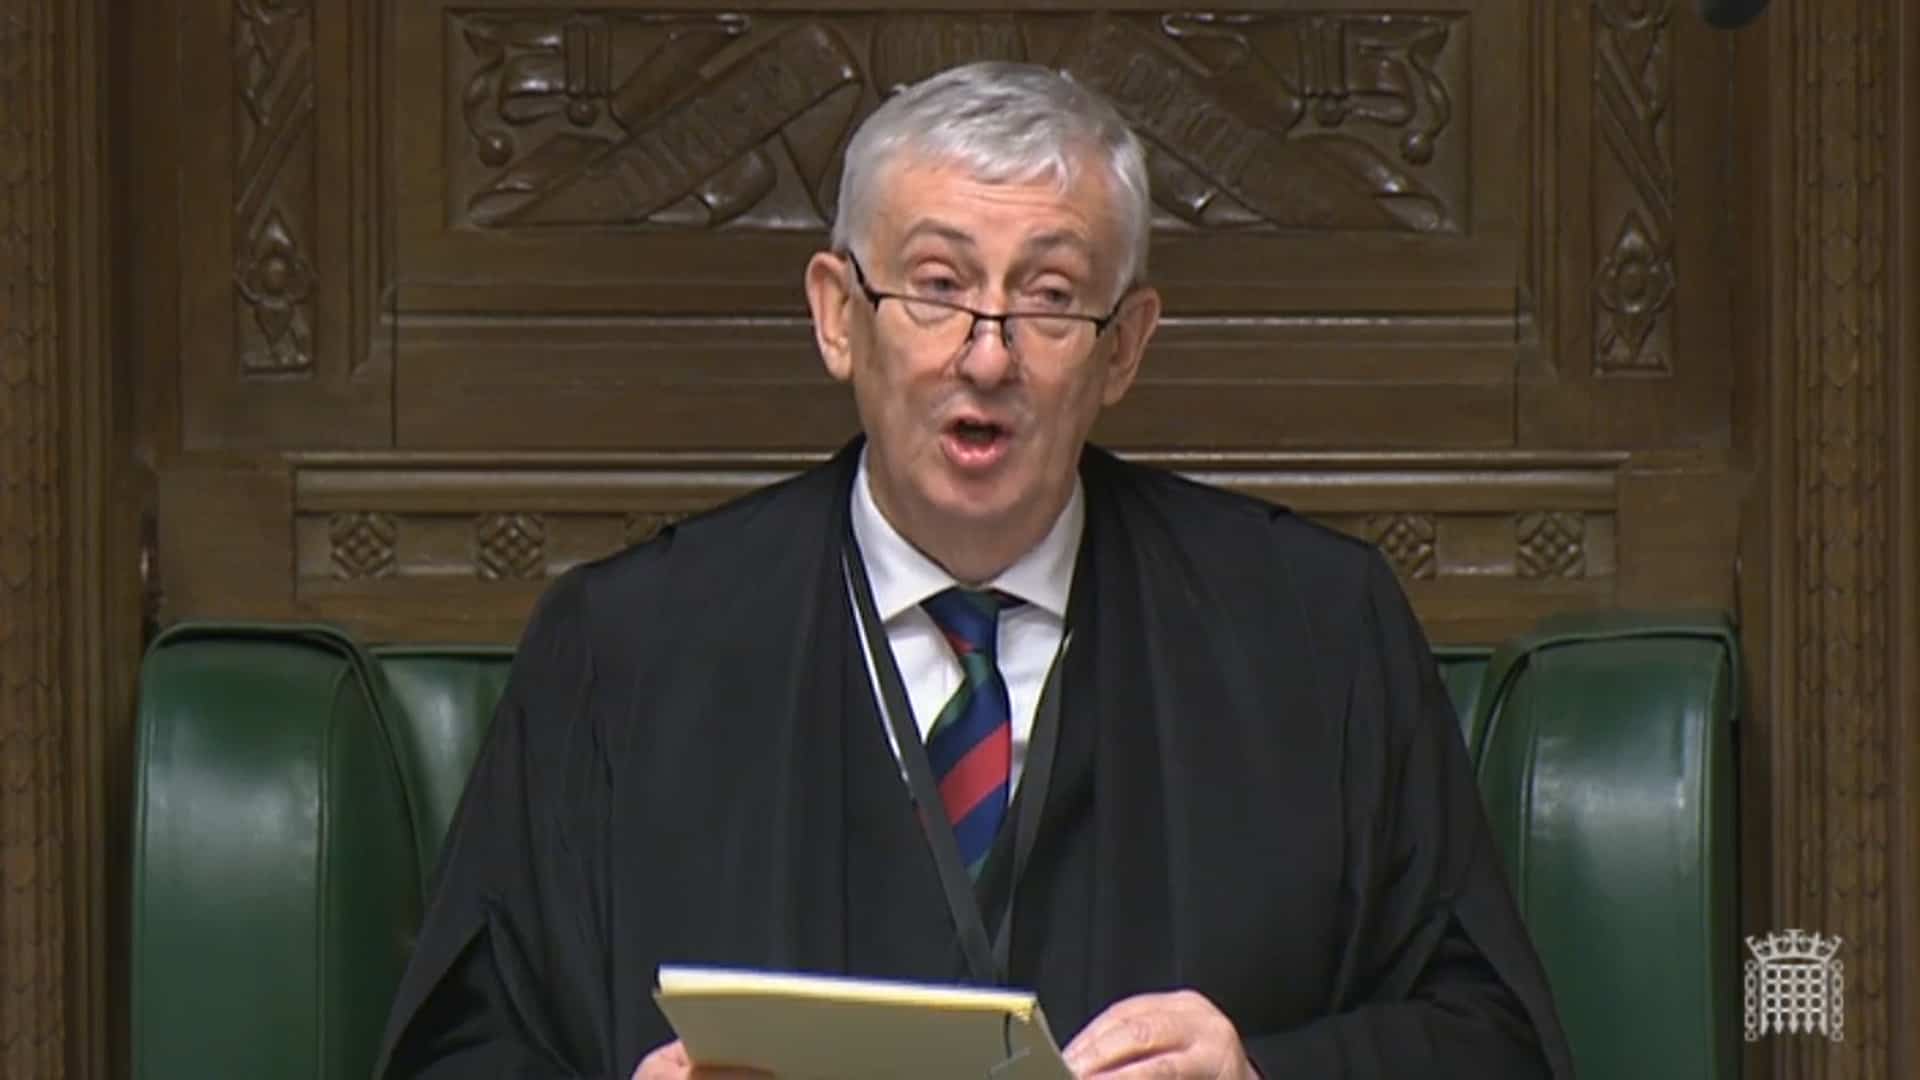 Parliament ‘not the appropriate place’ to highlight PM’s Islamophobia, Speaker claims